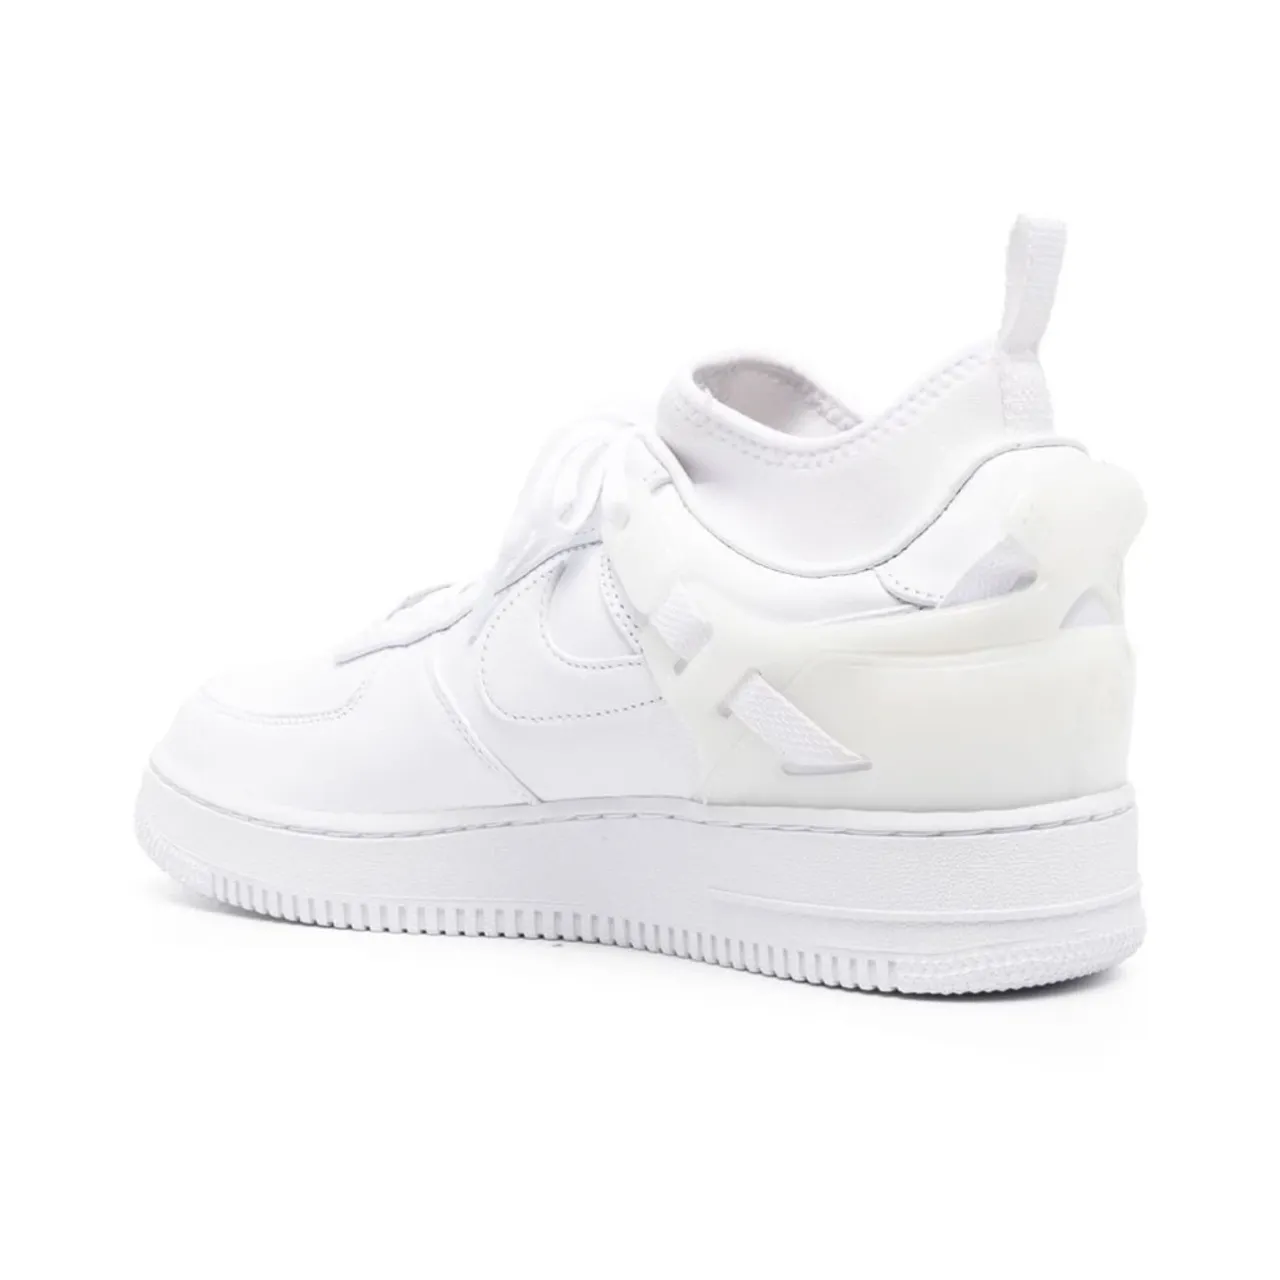 Undercover Air Force 1 Low SP Nike